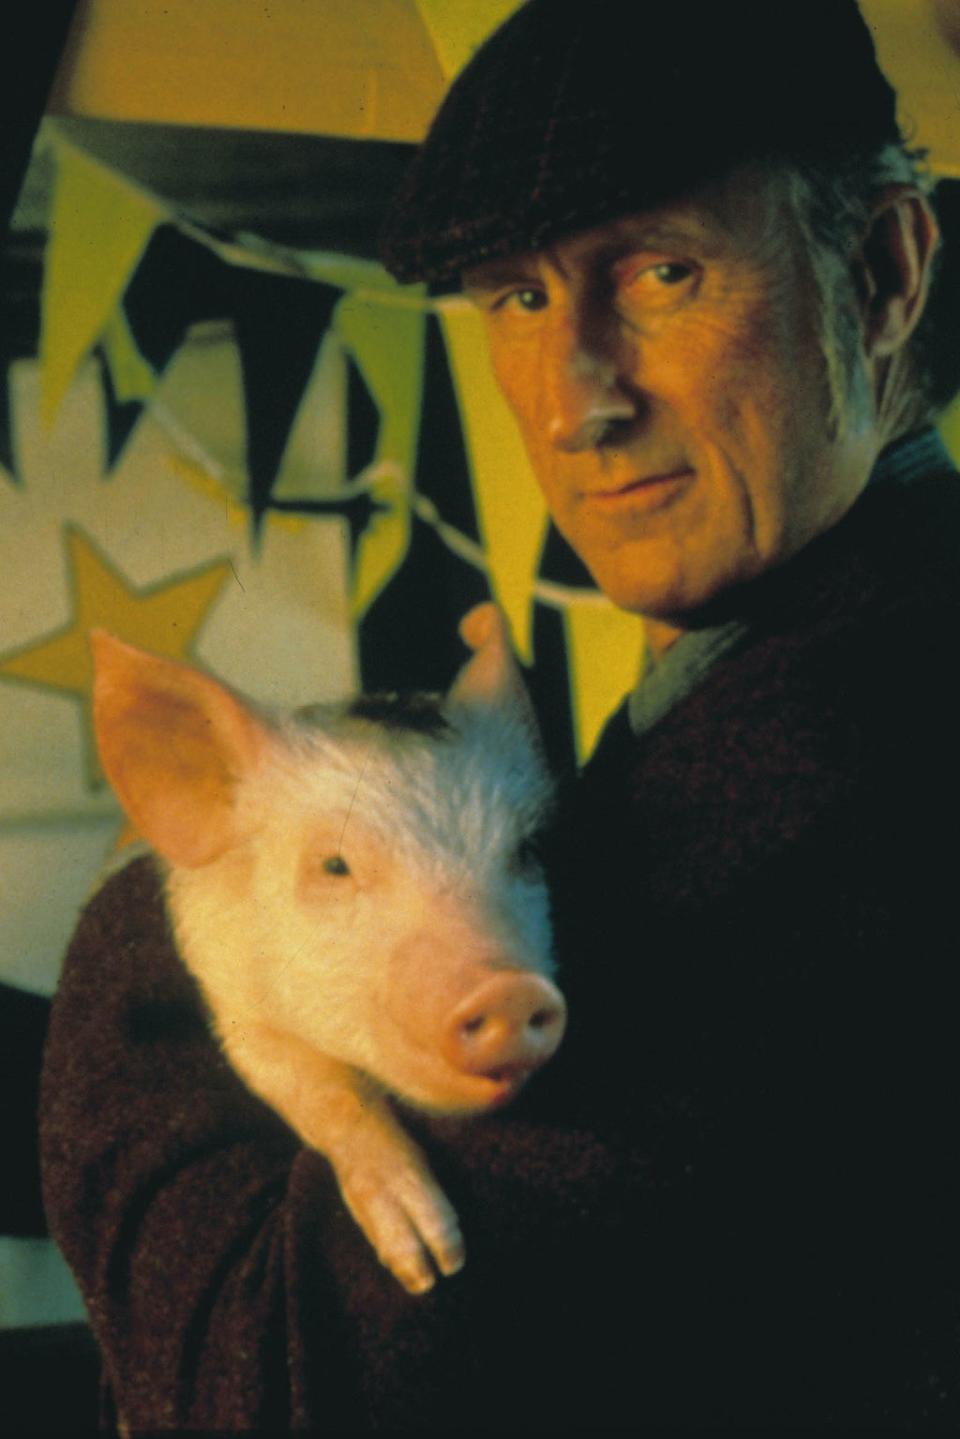 James Cromwell (with pig) in ‘Babe’ (Moviestore/Shutterstock)